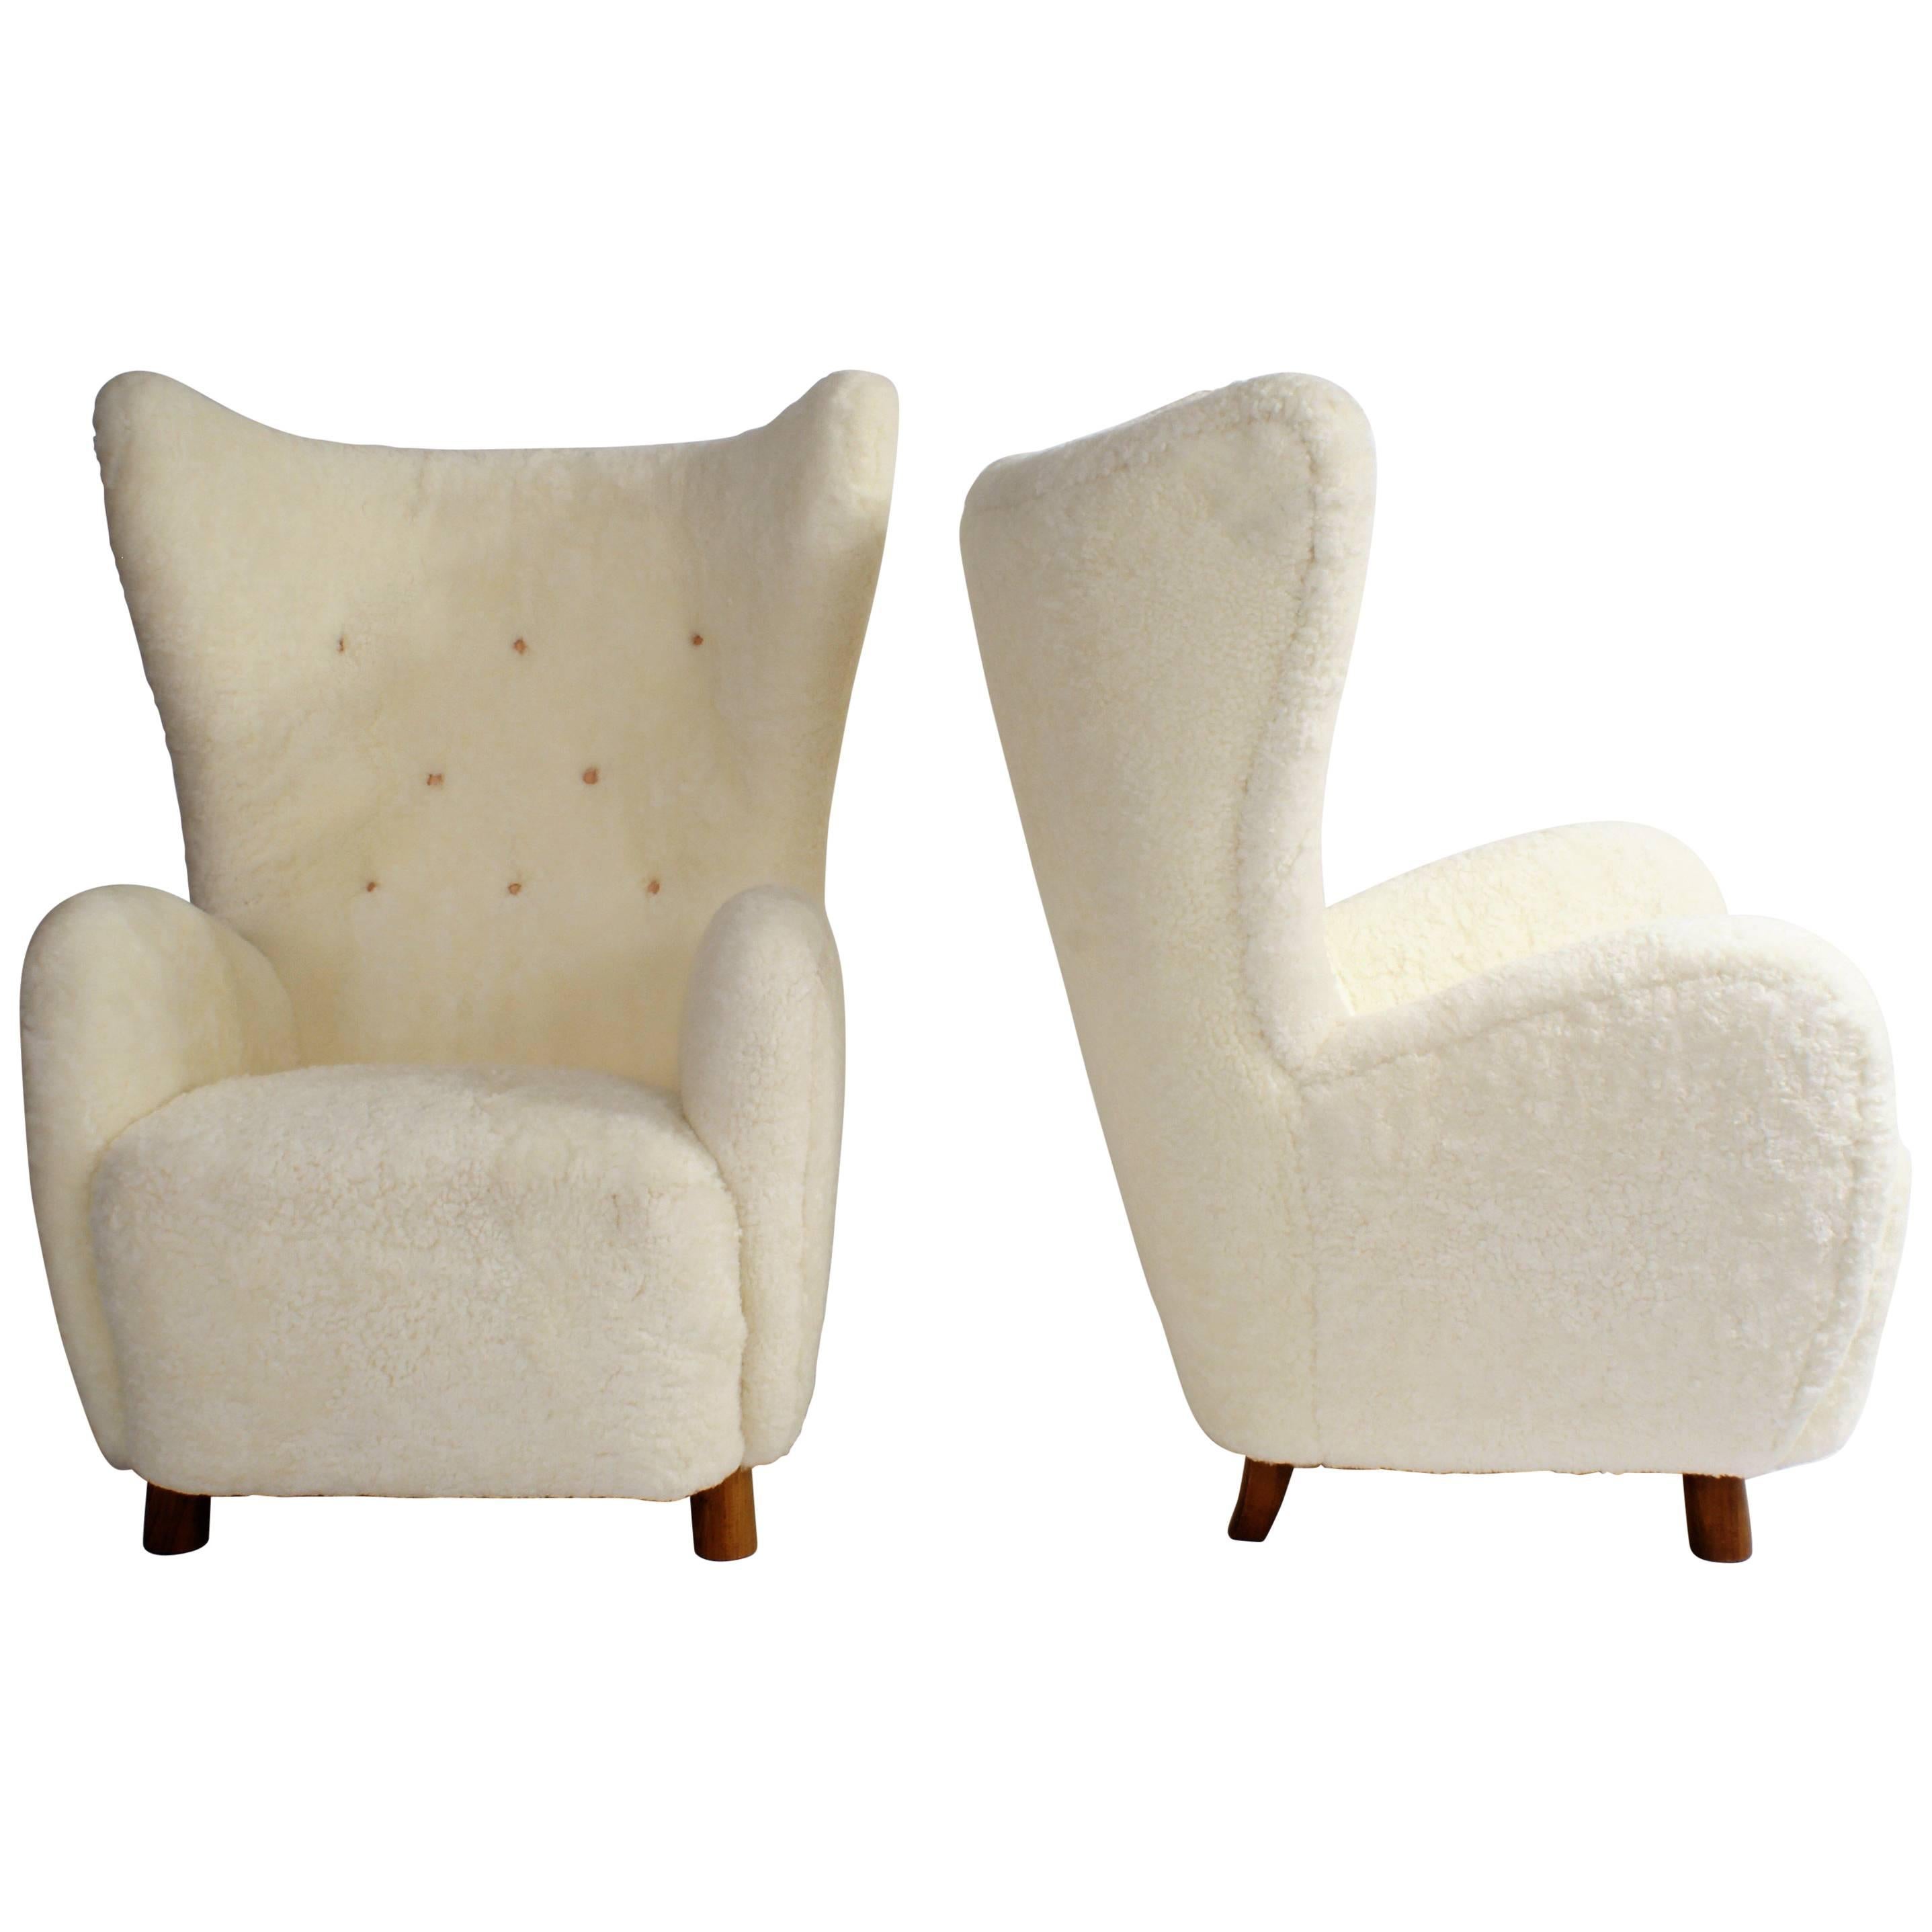 Mogens Lassen Pair of 1940s 'Wing' Easy Chairs in Sheepskin For Sale